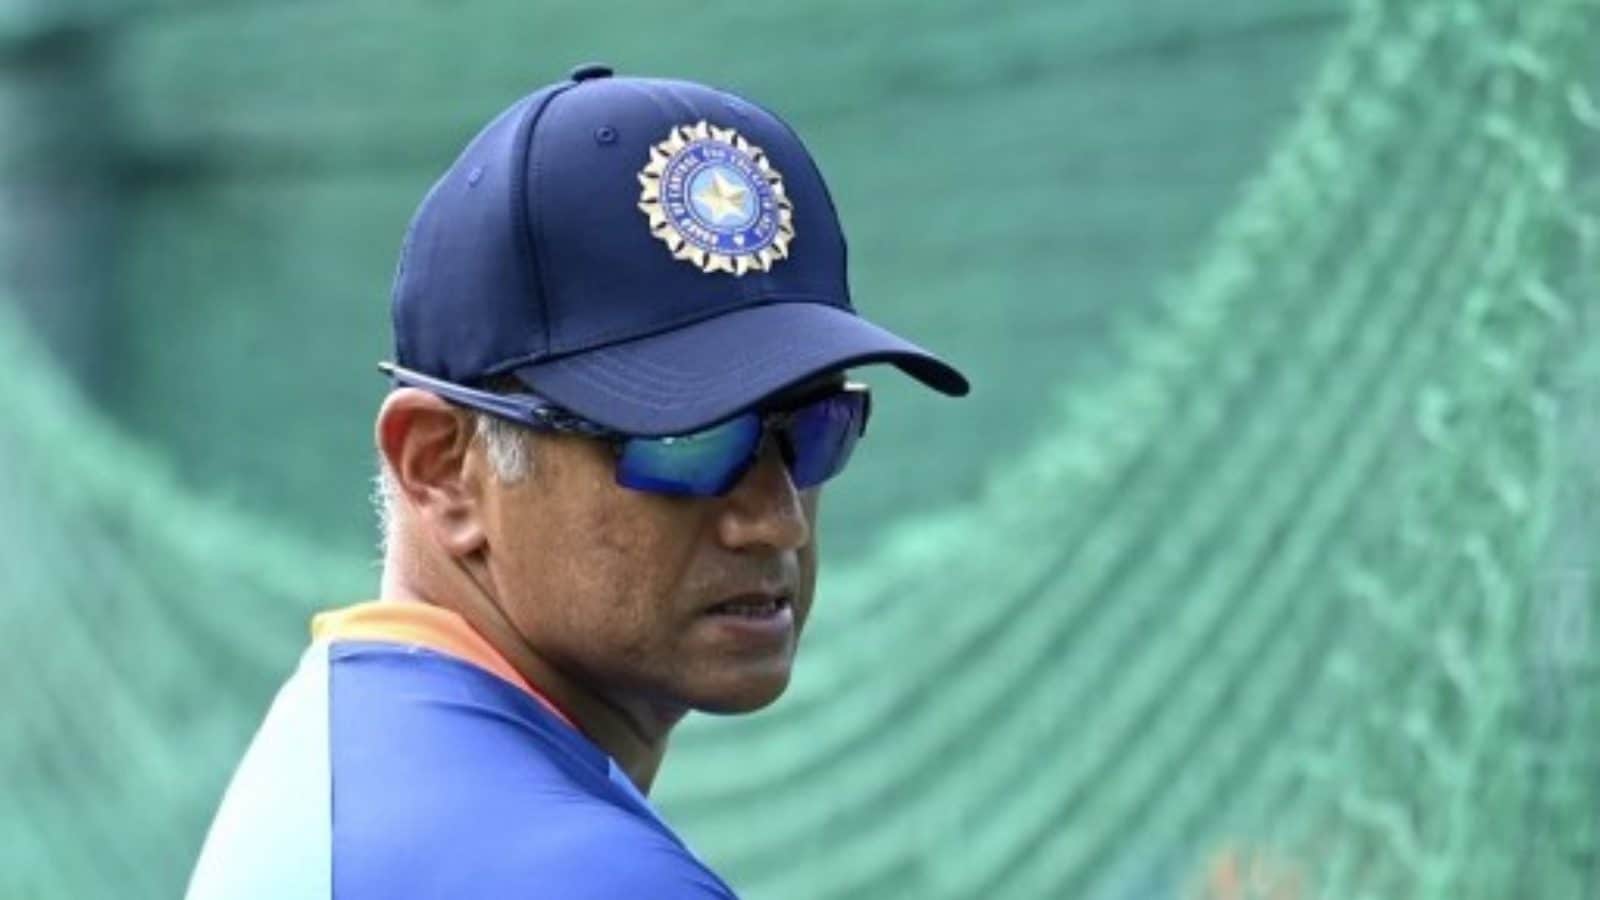 IND vs SL 3rd ODI: India Coach Rahul Dravid Unwell, Likely to Return to Bengaluru for Health Issue – Report